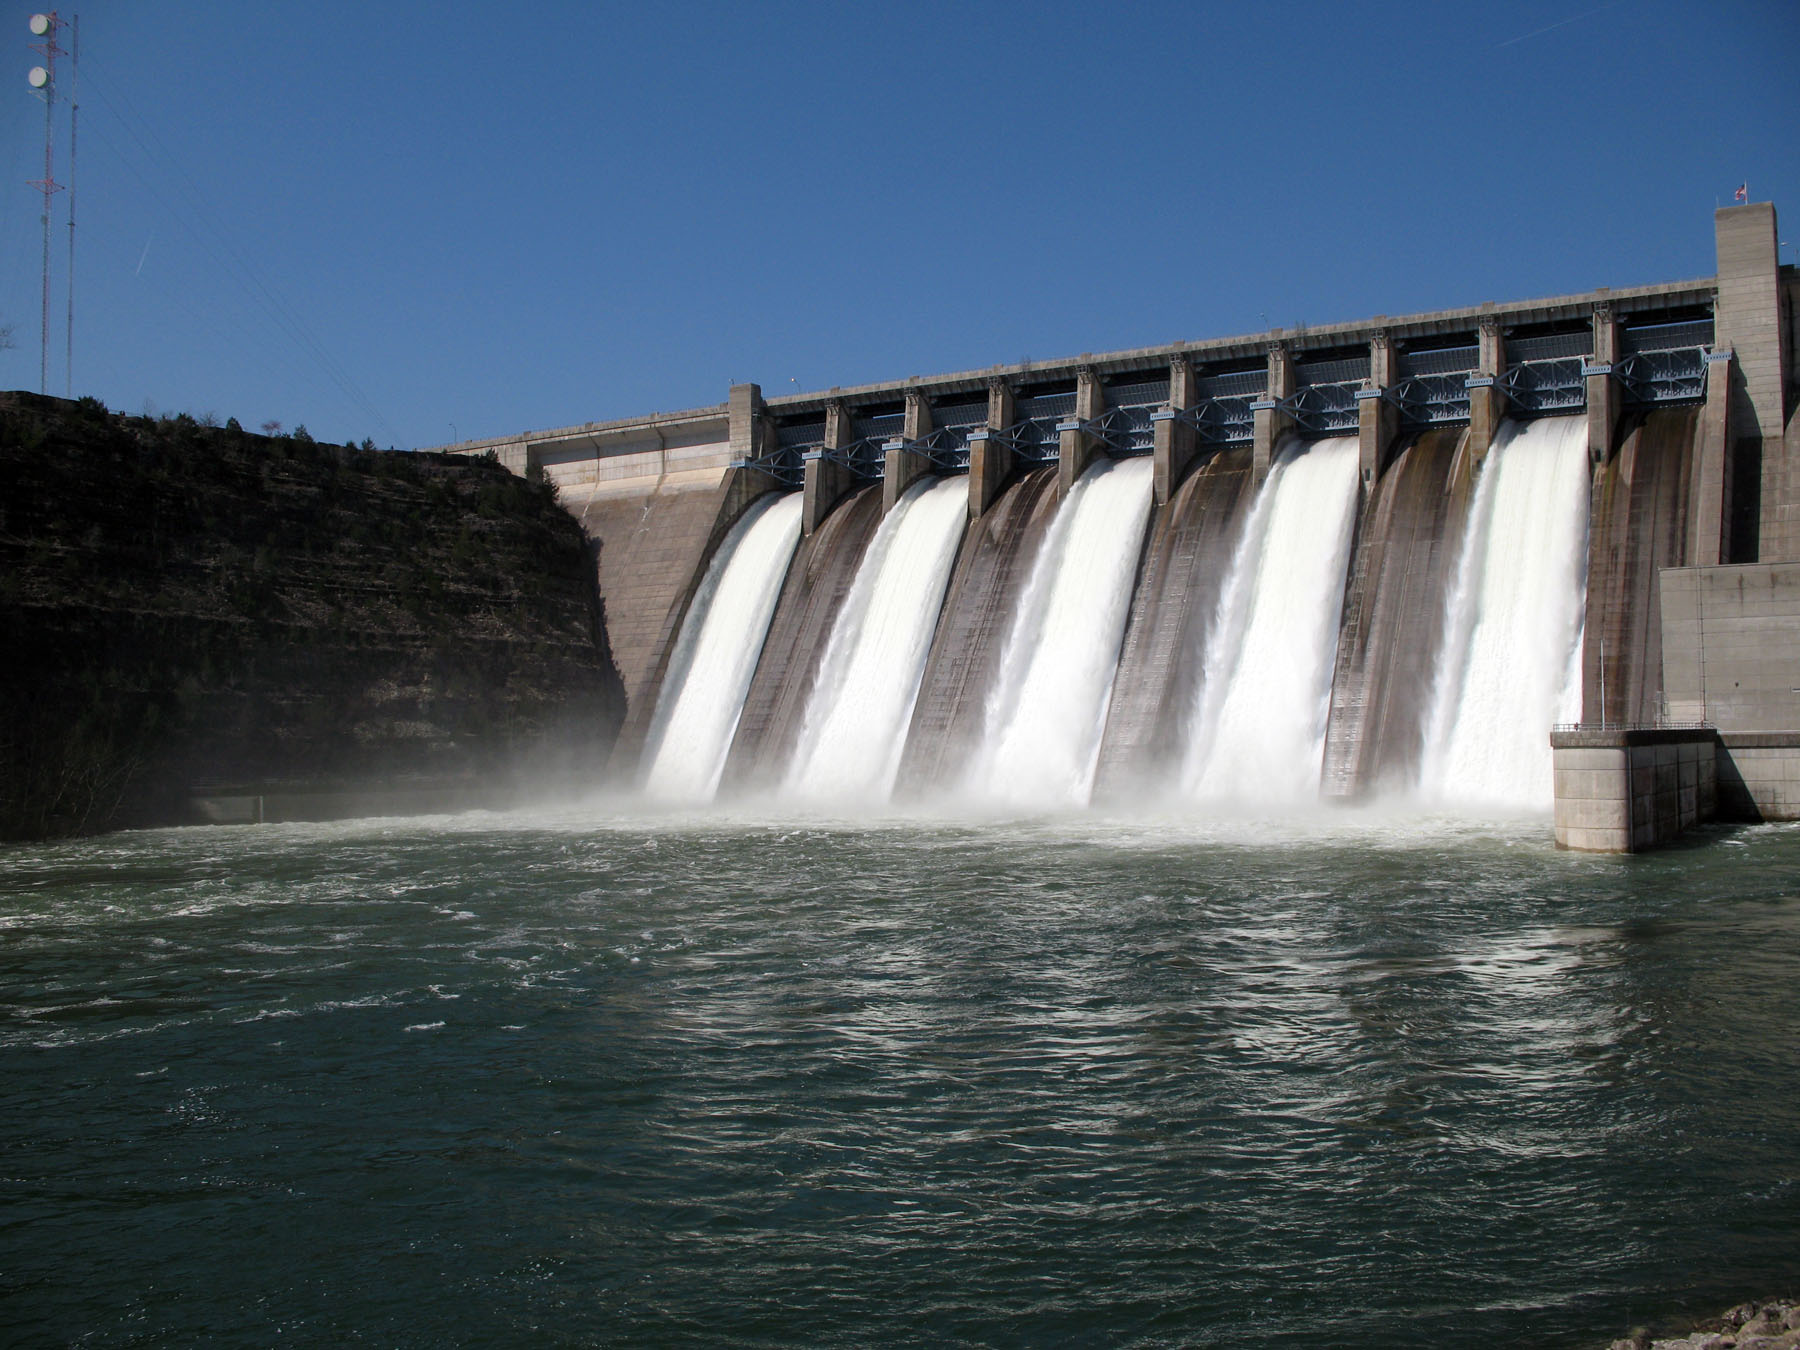 Ministry Bemoans Excessive Water, Power Consumption